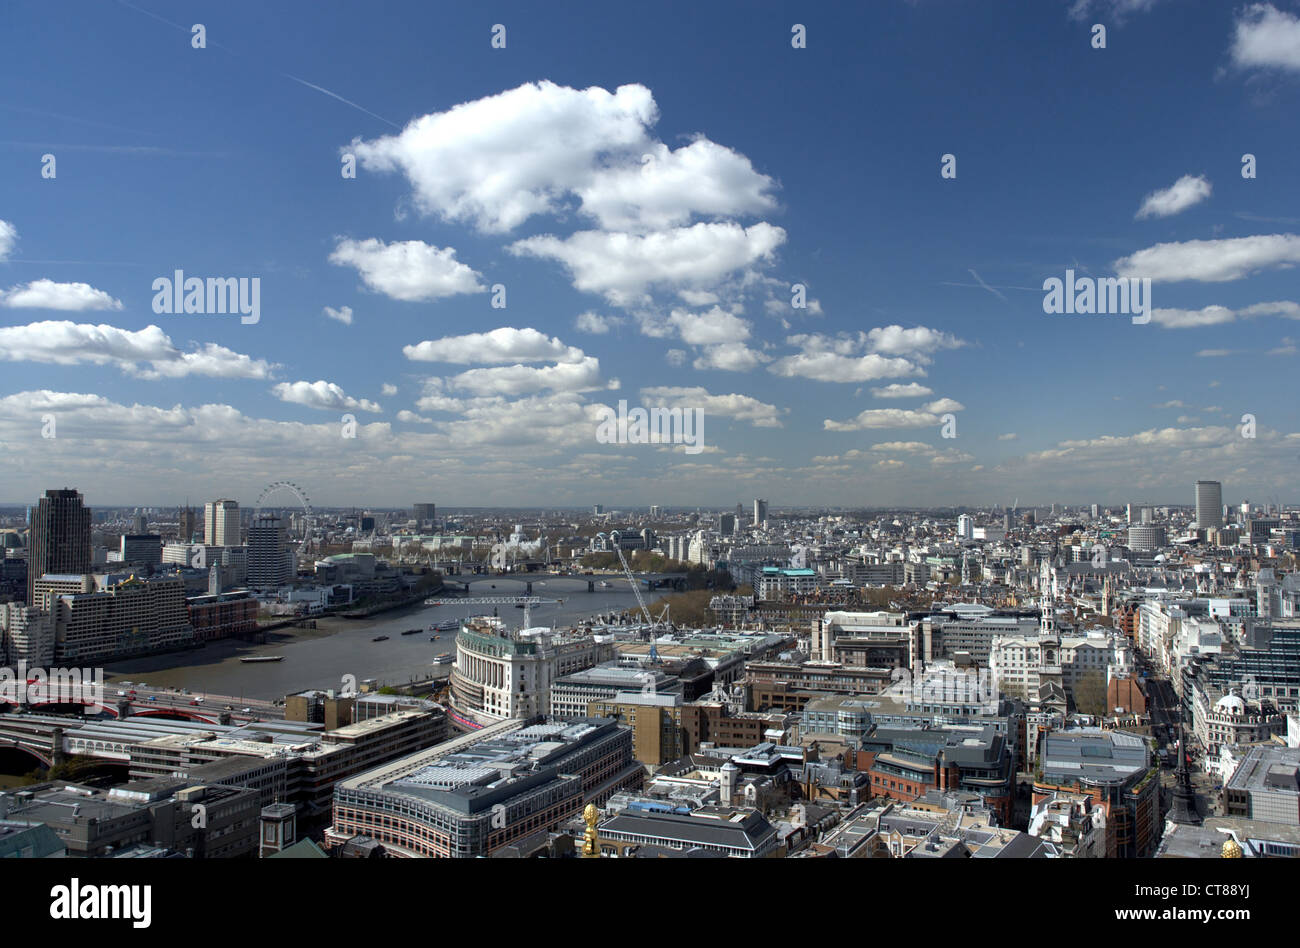 London - view over the city center with the River Thames Stock Photo